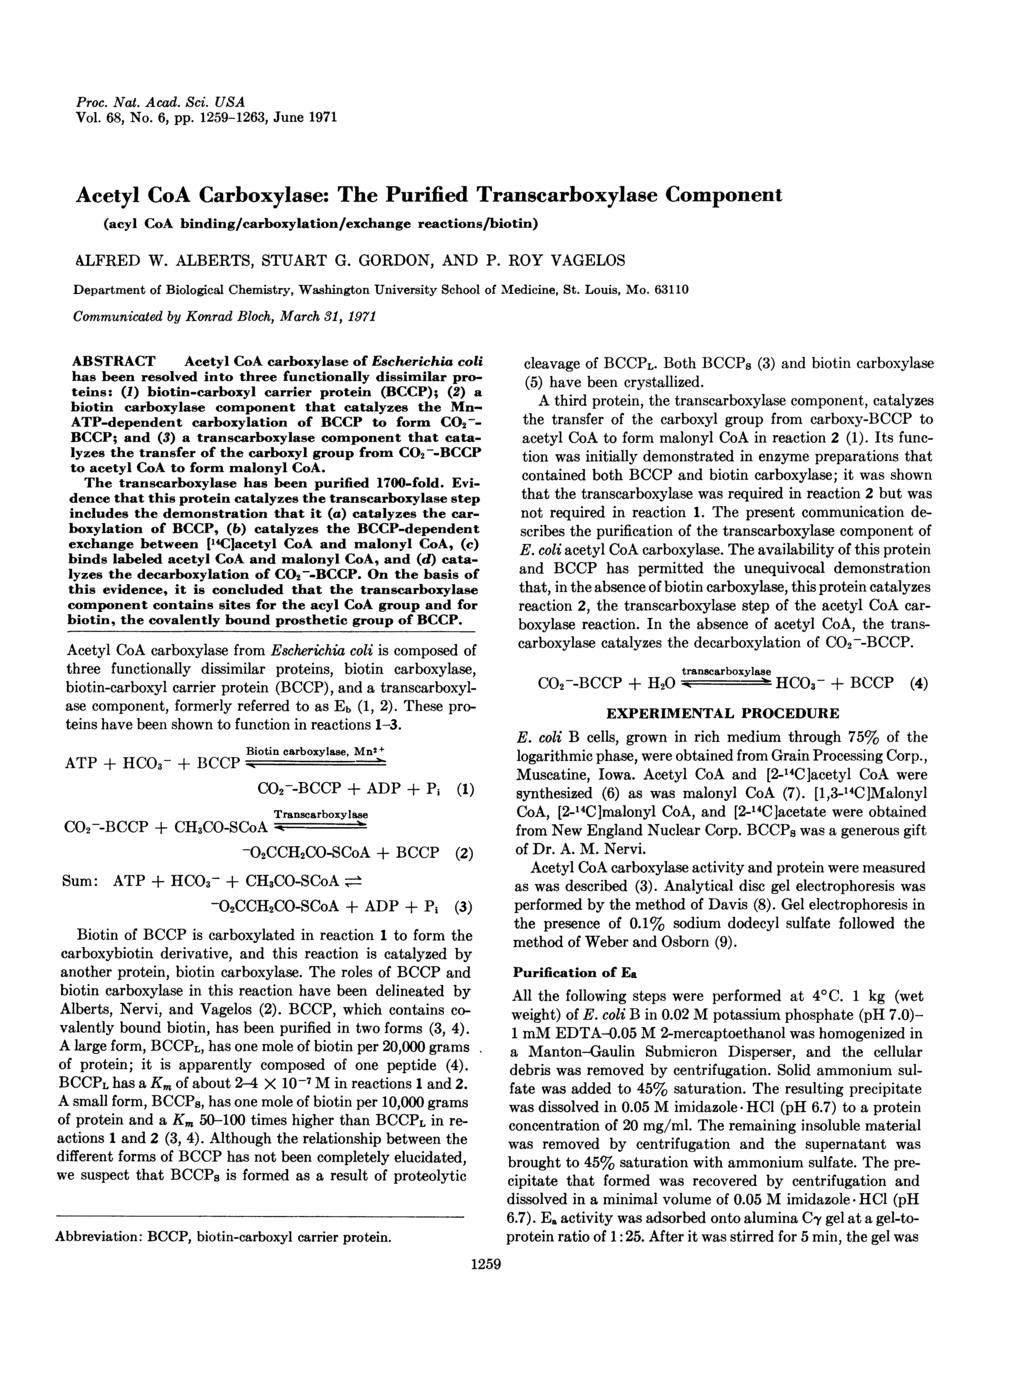 Proc. Nat. Acad. Sci. USA Vol. 68, No. 6, pp. 12591263, June 1971 Acetyl CoA Carboxylase: The Purified Transcarboxylase Component (acyl CoA binding/carboxylation/exchange reactions/biotin) ALFRED W.